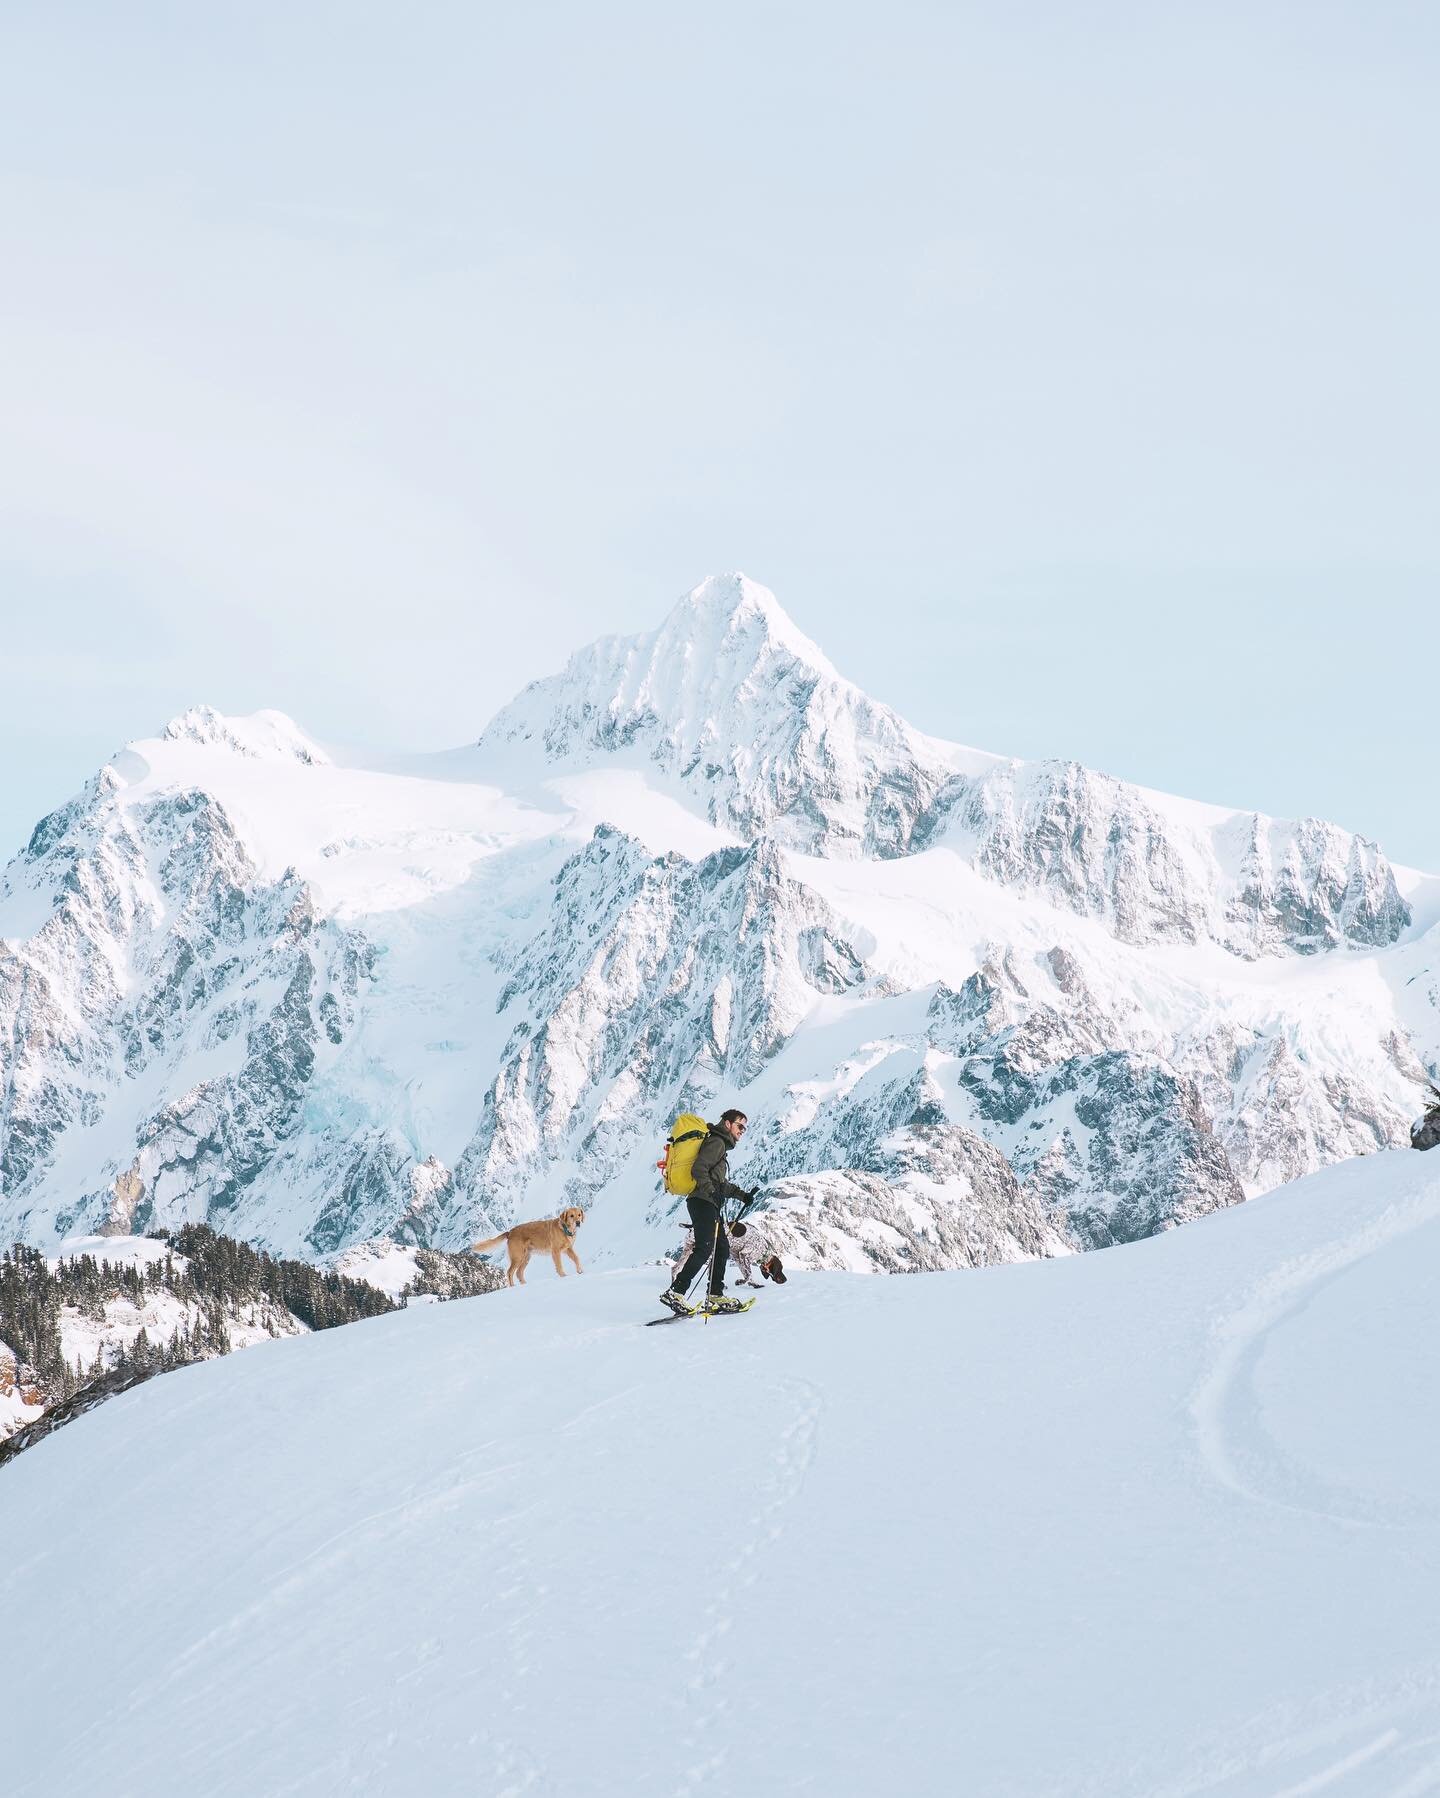 I have to be honest, I never was into snowshoeing. I  always opted for my splitboard and skins when it came to exploring the backcountry of the Pacific Northwest because I do love a fast decent down the mountain. Last spring, I tried snowshoeing for 